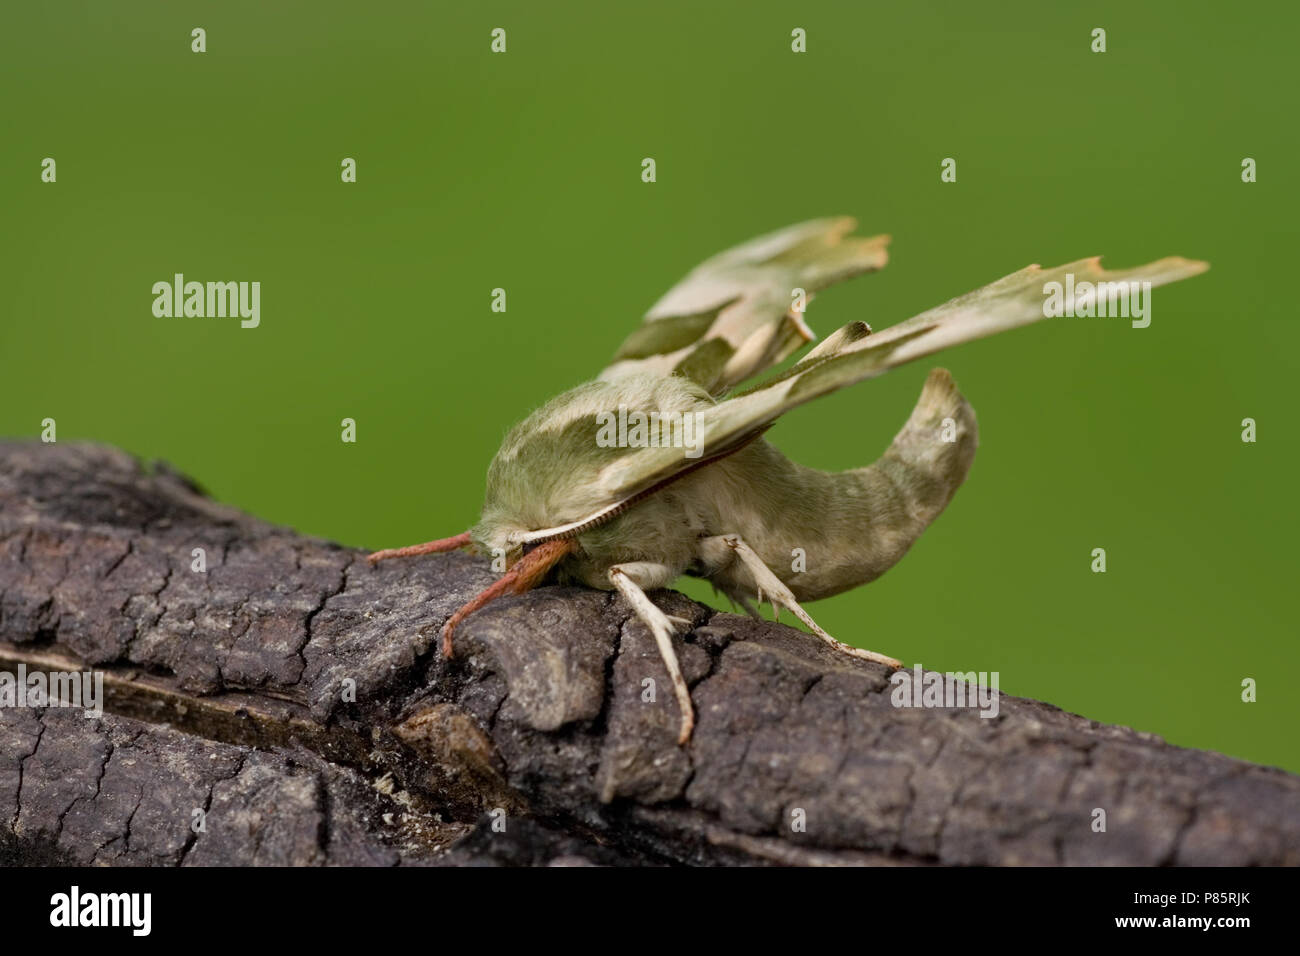 Lime Hawkmoth; Lindepijlstaart Stock Photo